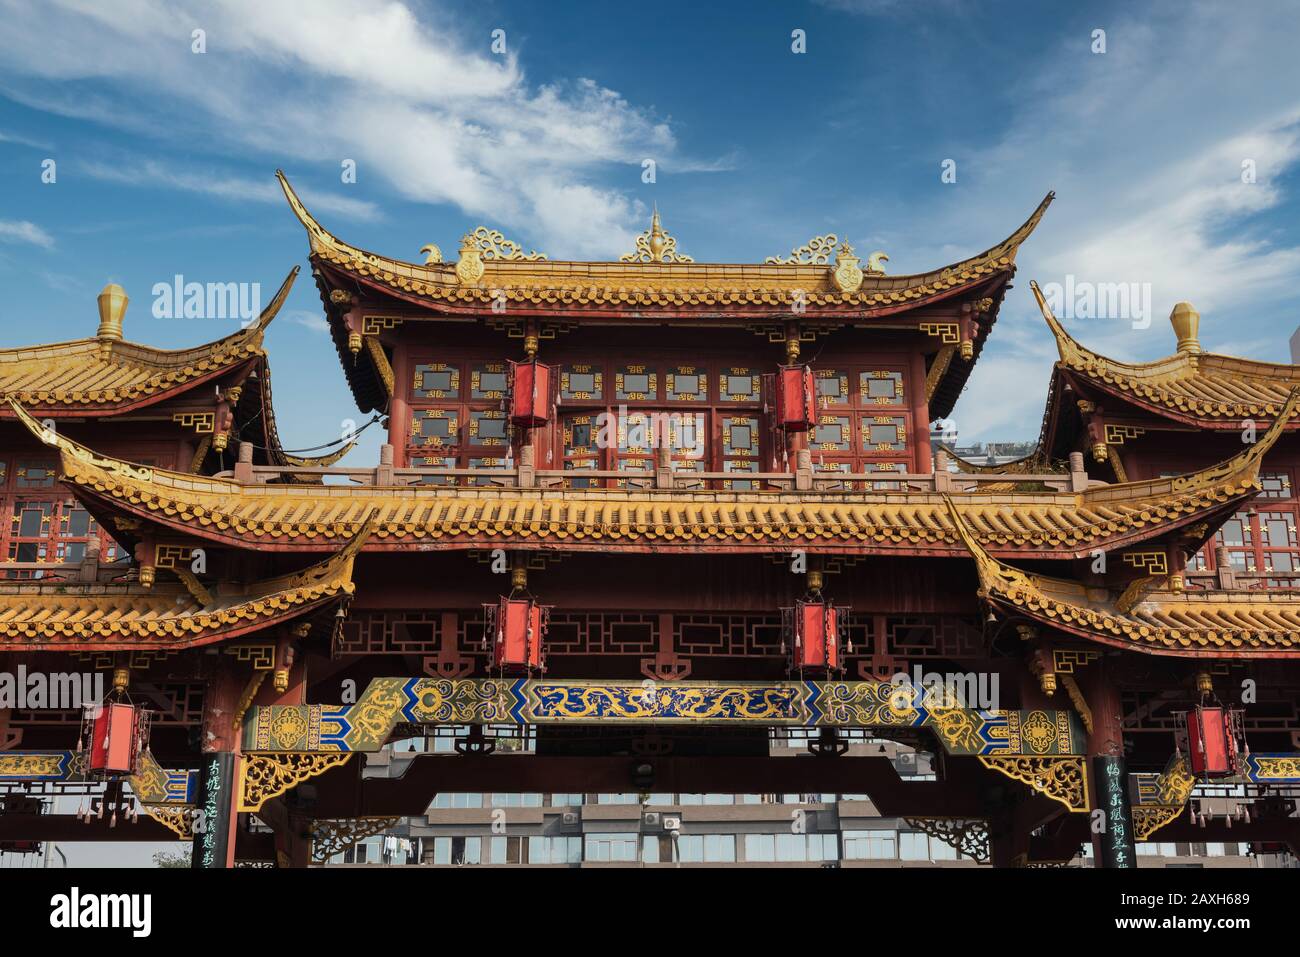 Top View Of Sinoocean Taikoo Li And Daci Temple In Chengdu Sichuan China  Stock Photo - Download Image Now - iStock